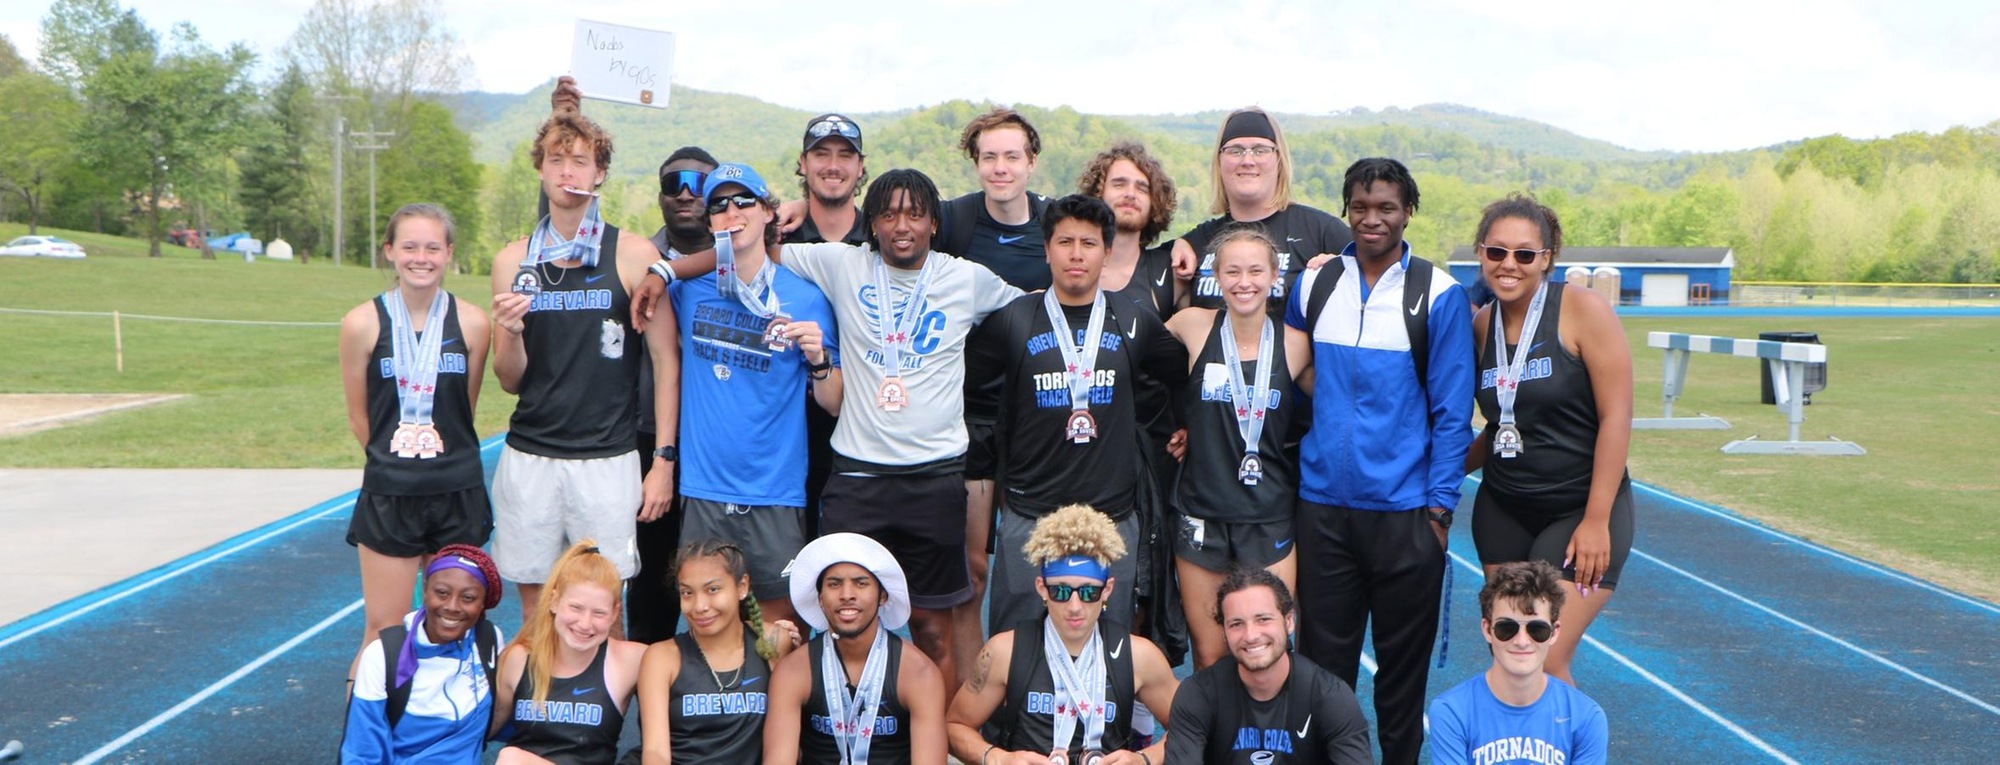 Outstanding Results for Tornados at USA South Conference Championships Hosted by Brevard College